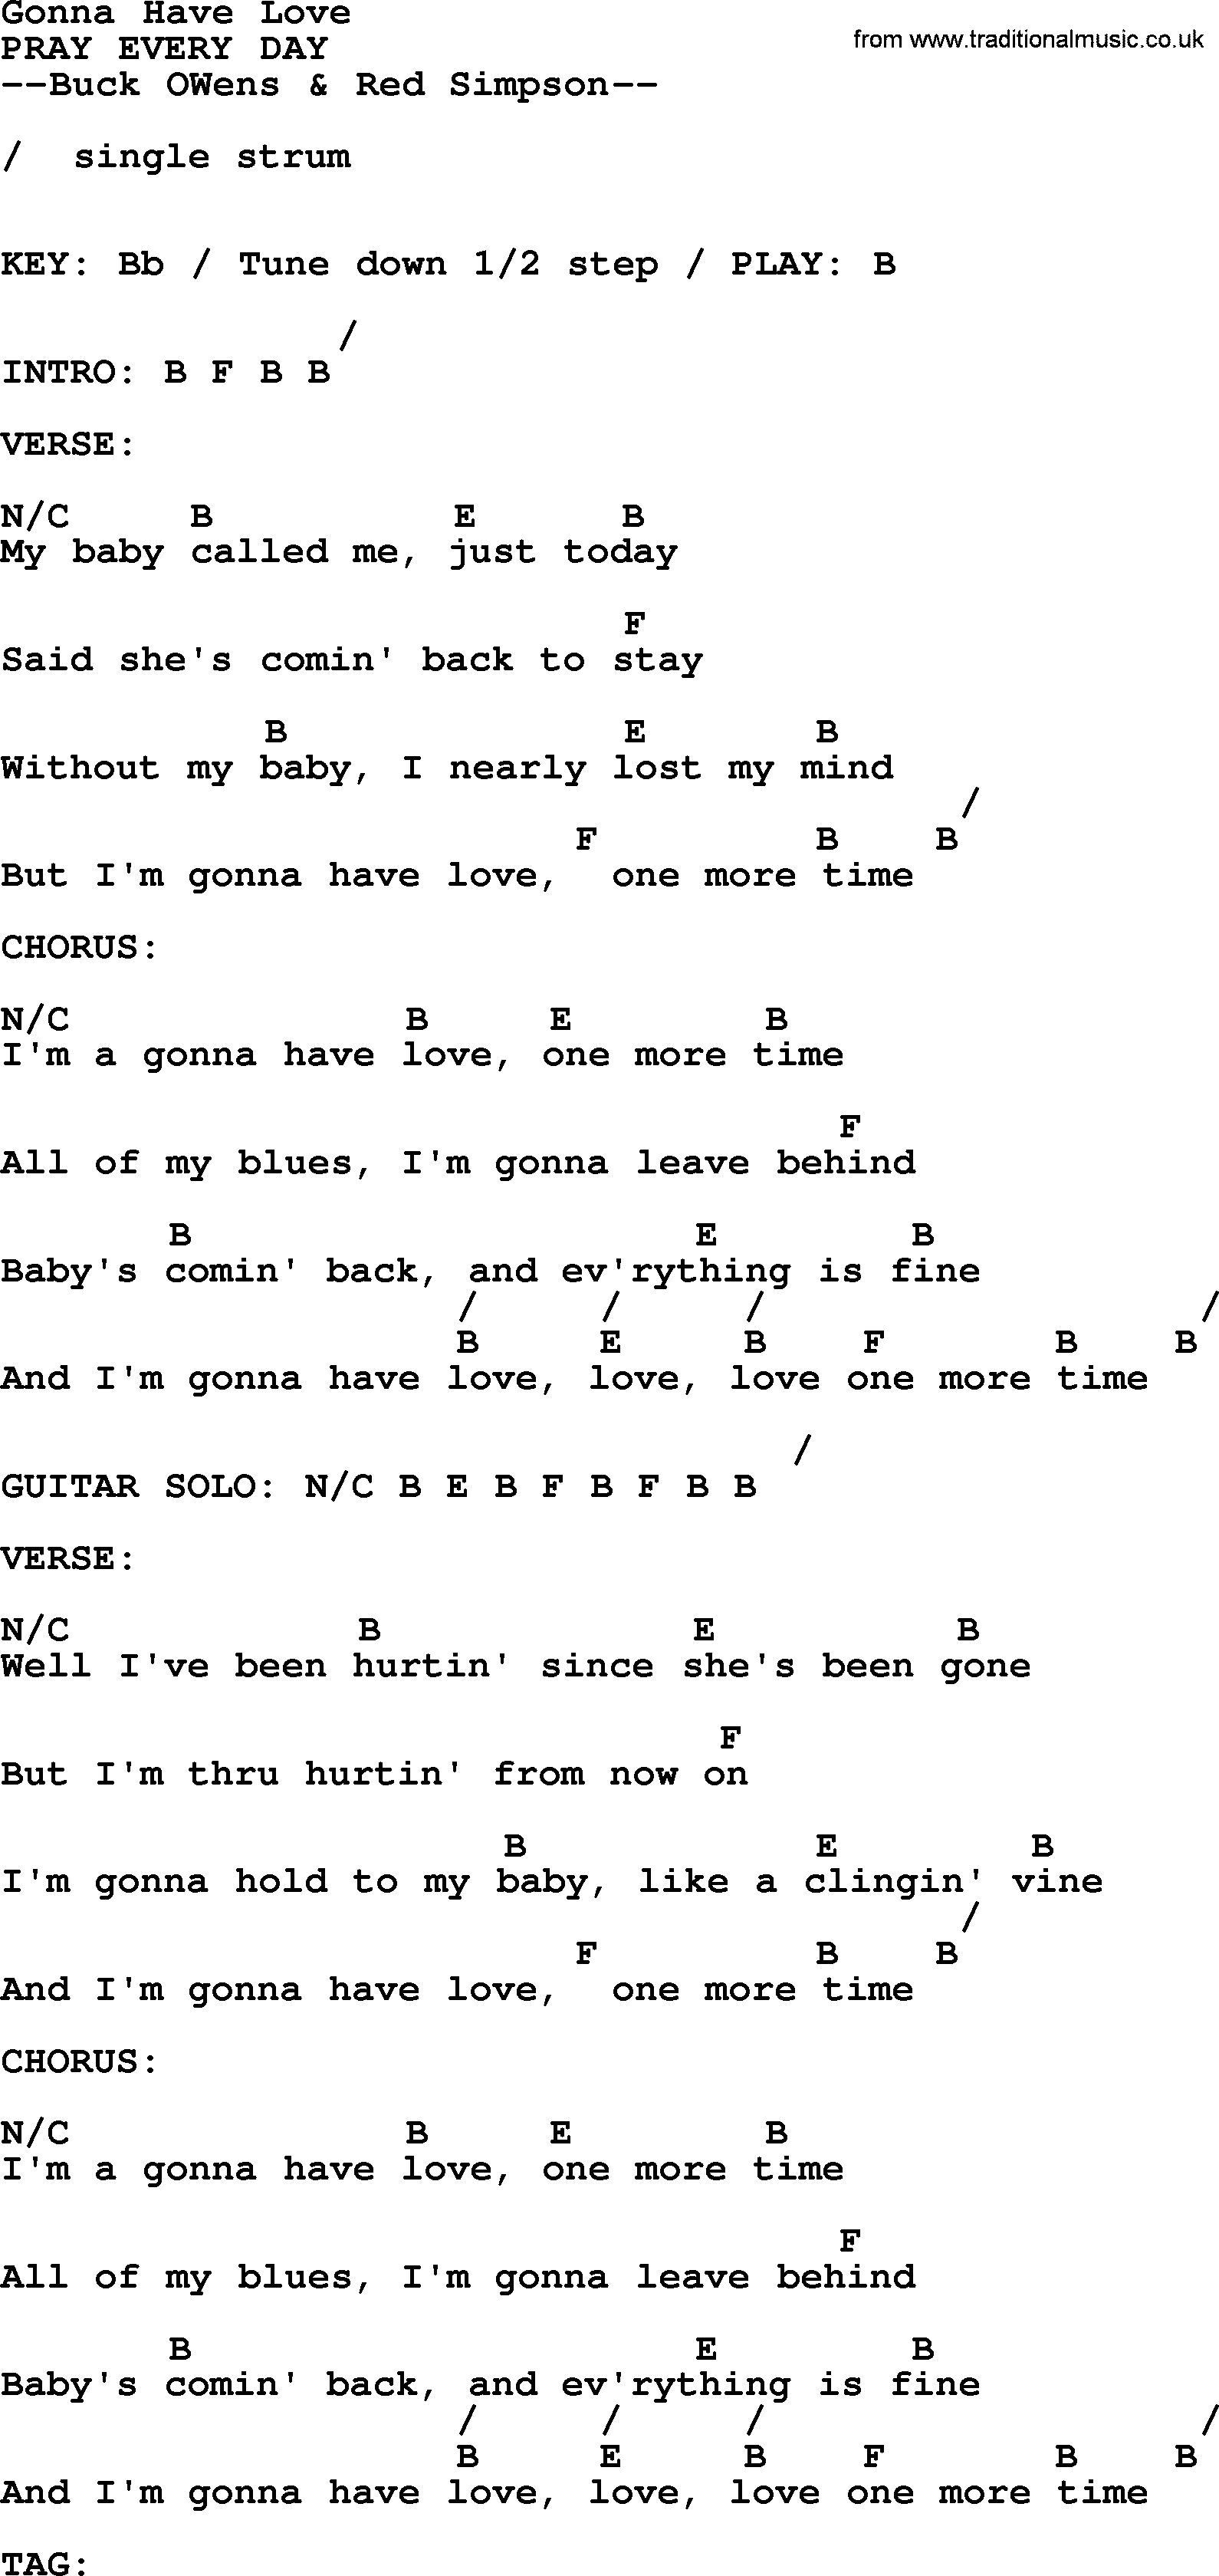 Bluegrass song: Gonna Have Love, lyrics and chords